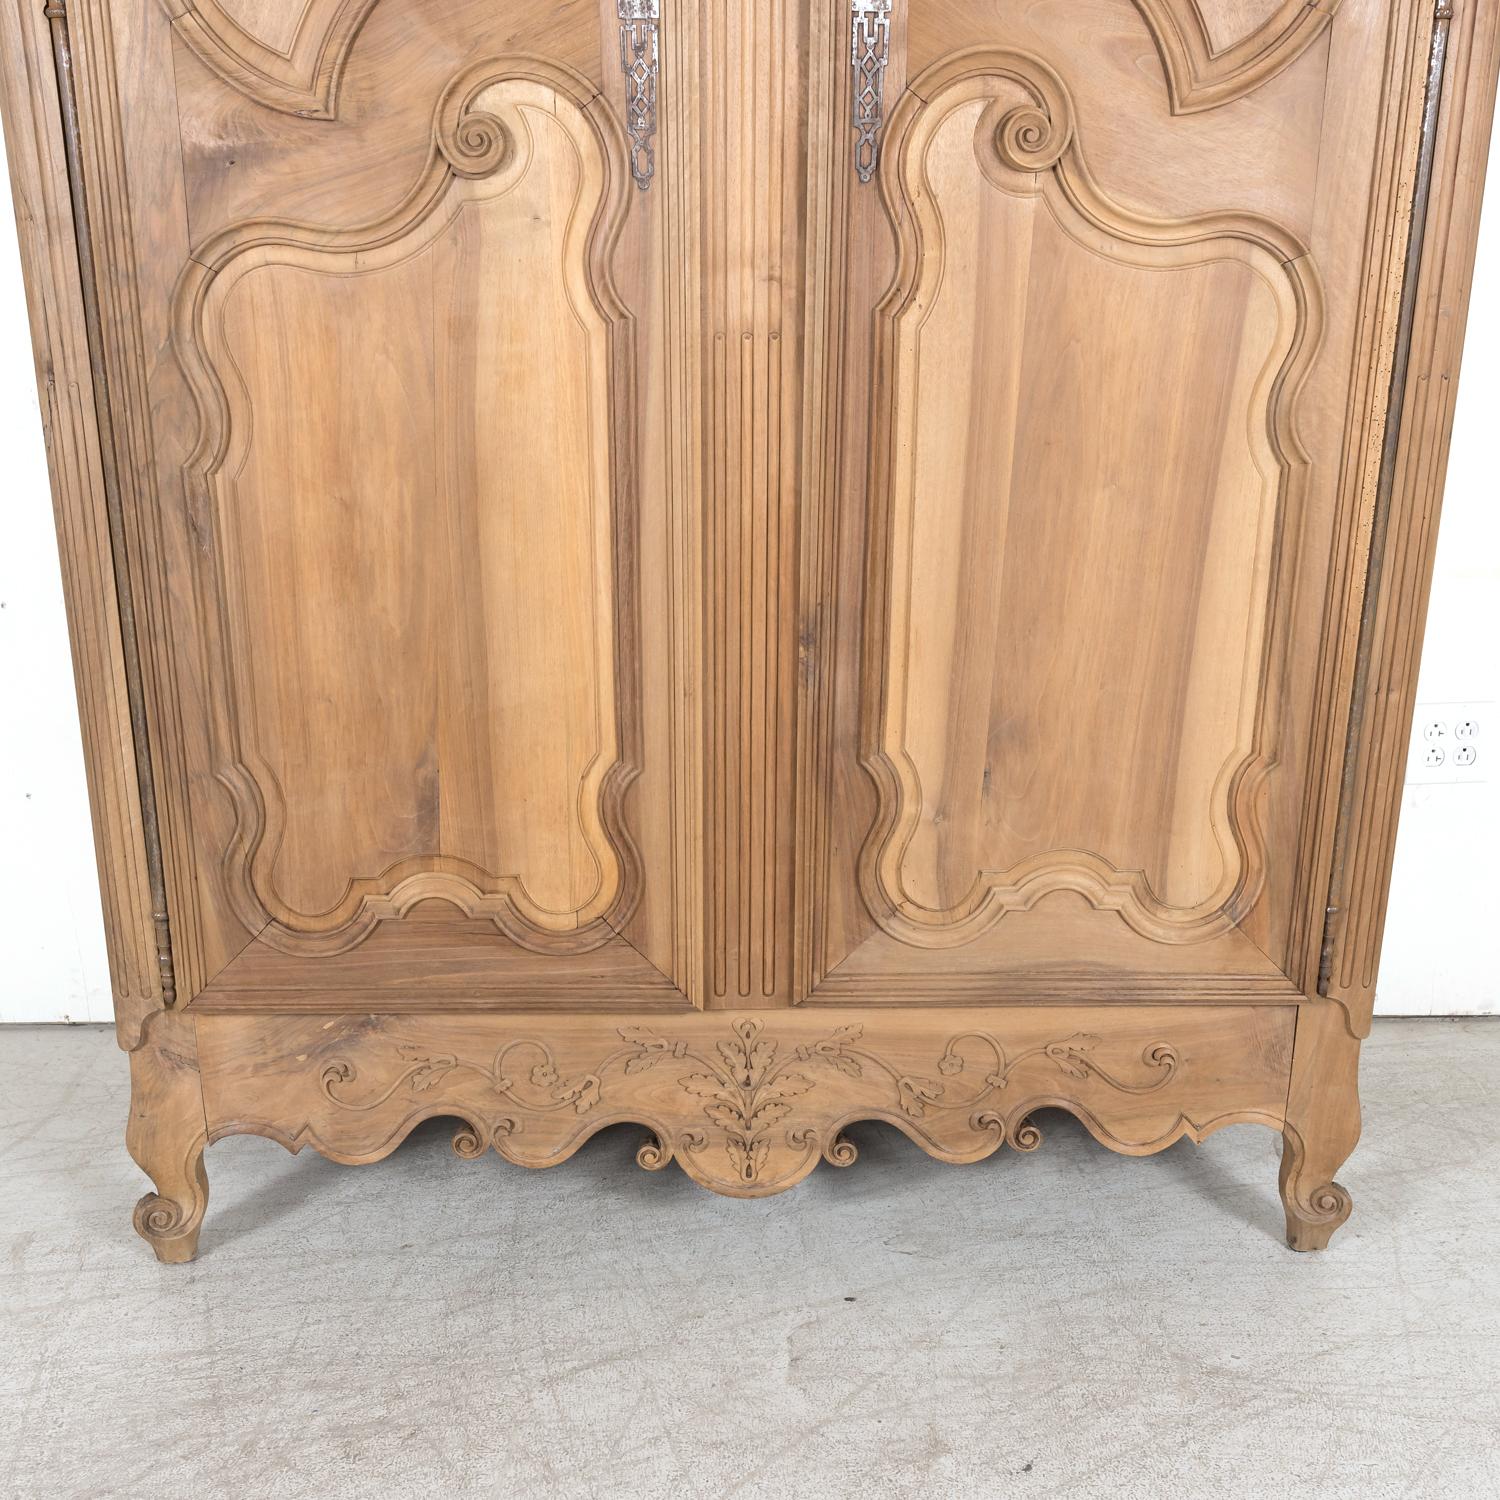 Monumental 18th Century French Louis XV Period Bleached Walnut Lyonnaise Armoire For Sale 9